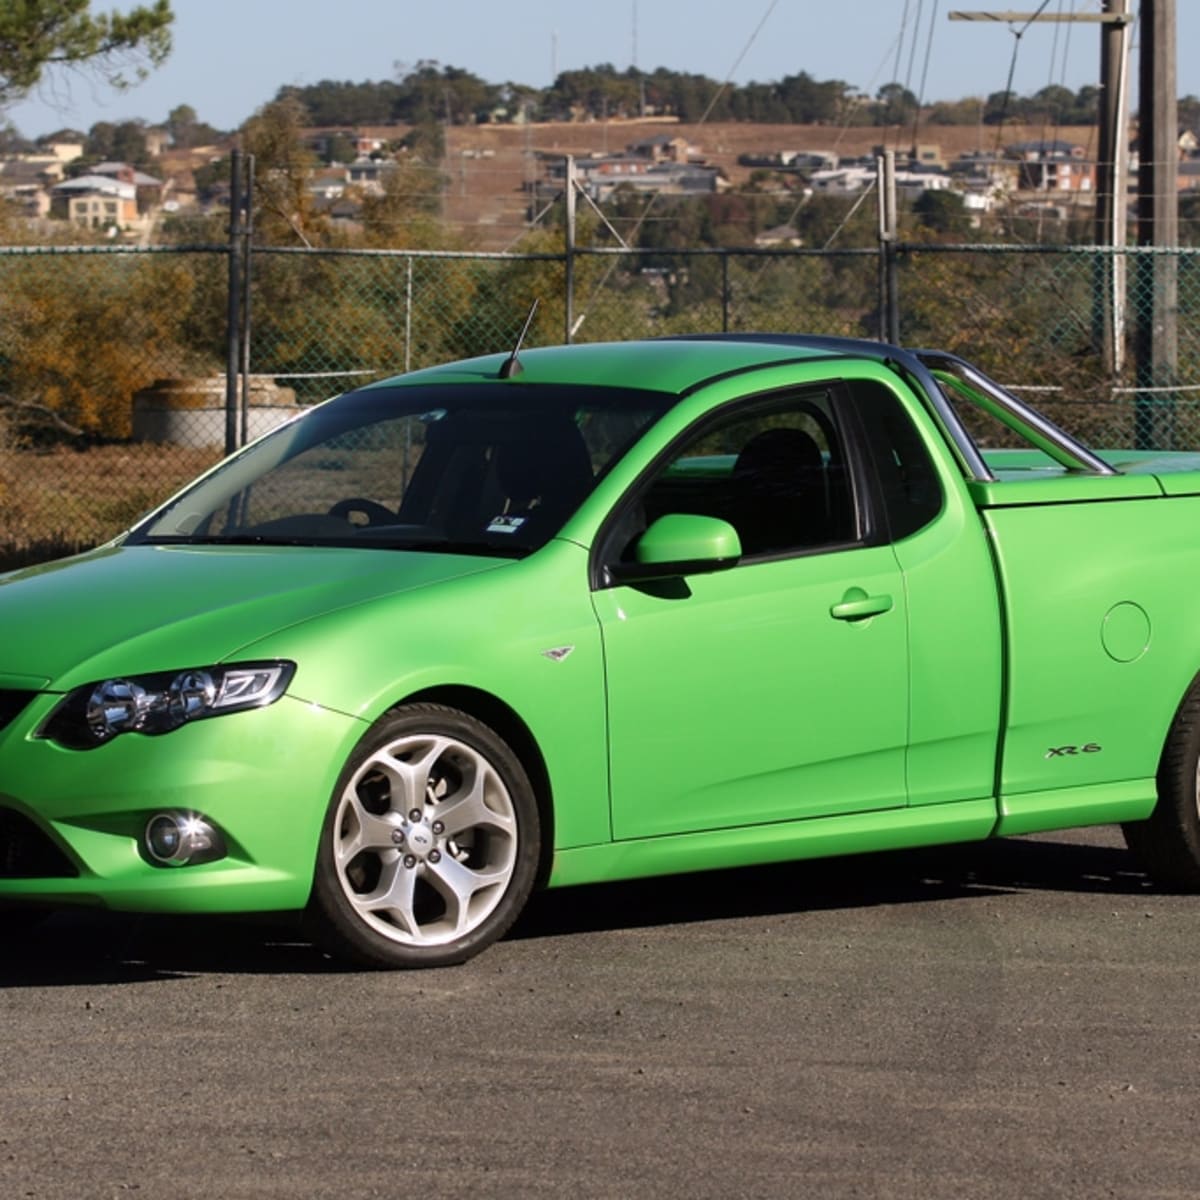 Ford Falcon Xr6 Turbo Ute Review Road Test Caradvice